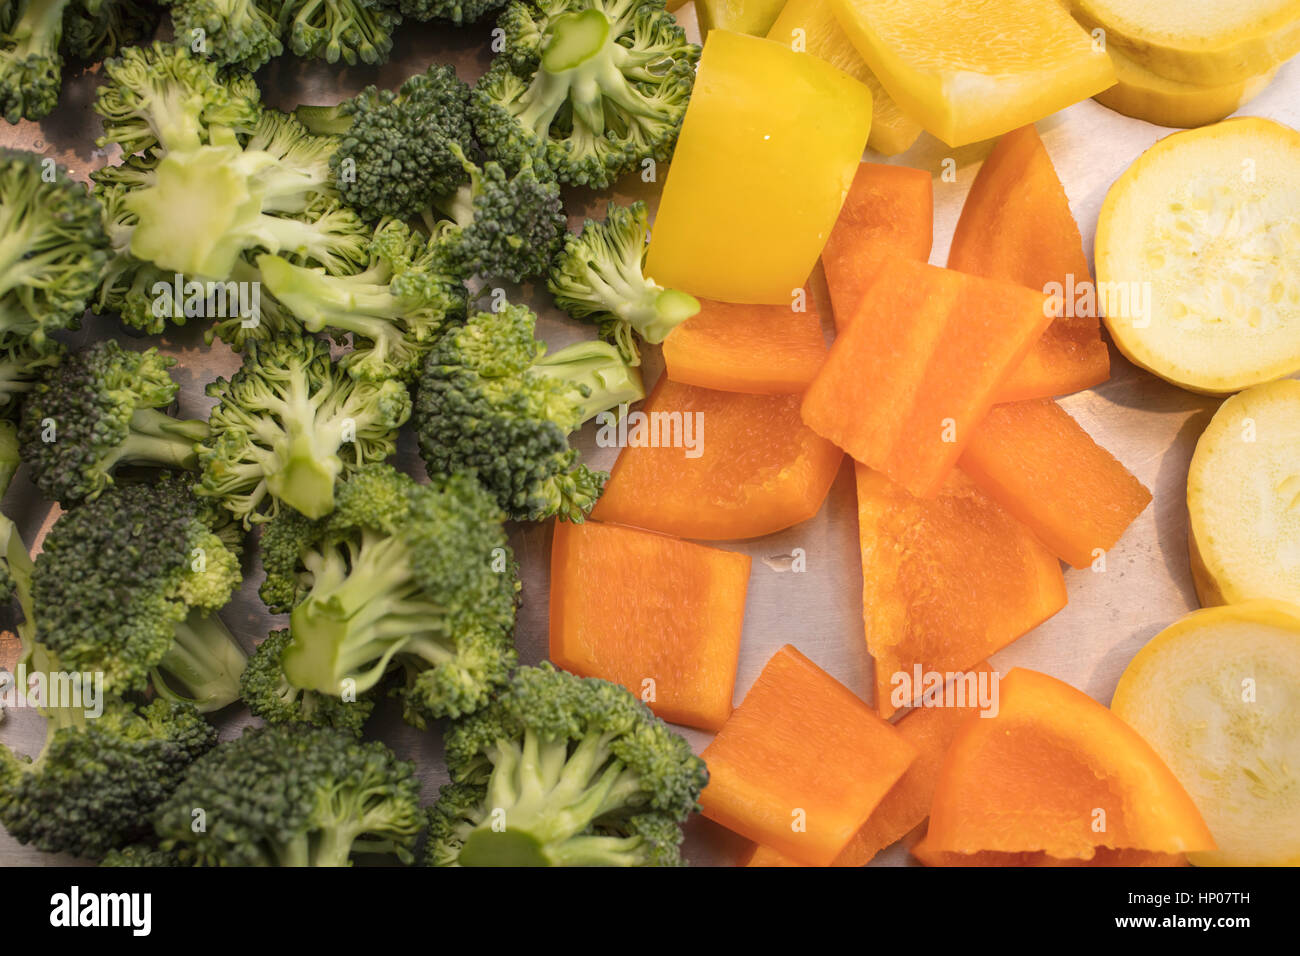 Brightly colored Cauliflower, Broccoli, Bell Peppers and Zucchini being prepared to be roasted  for a dinner meal Stock Photo